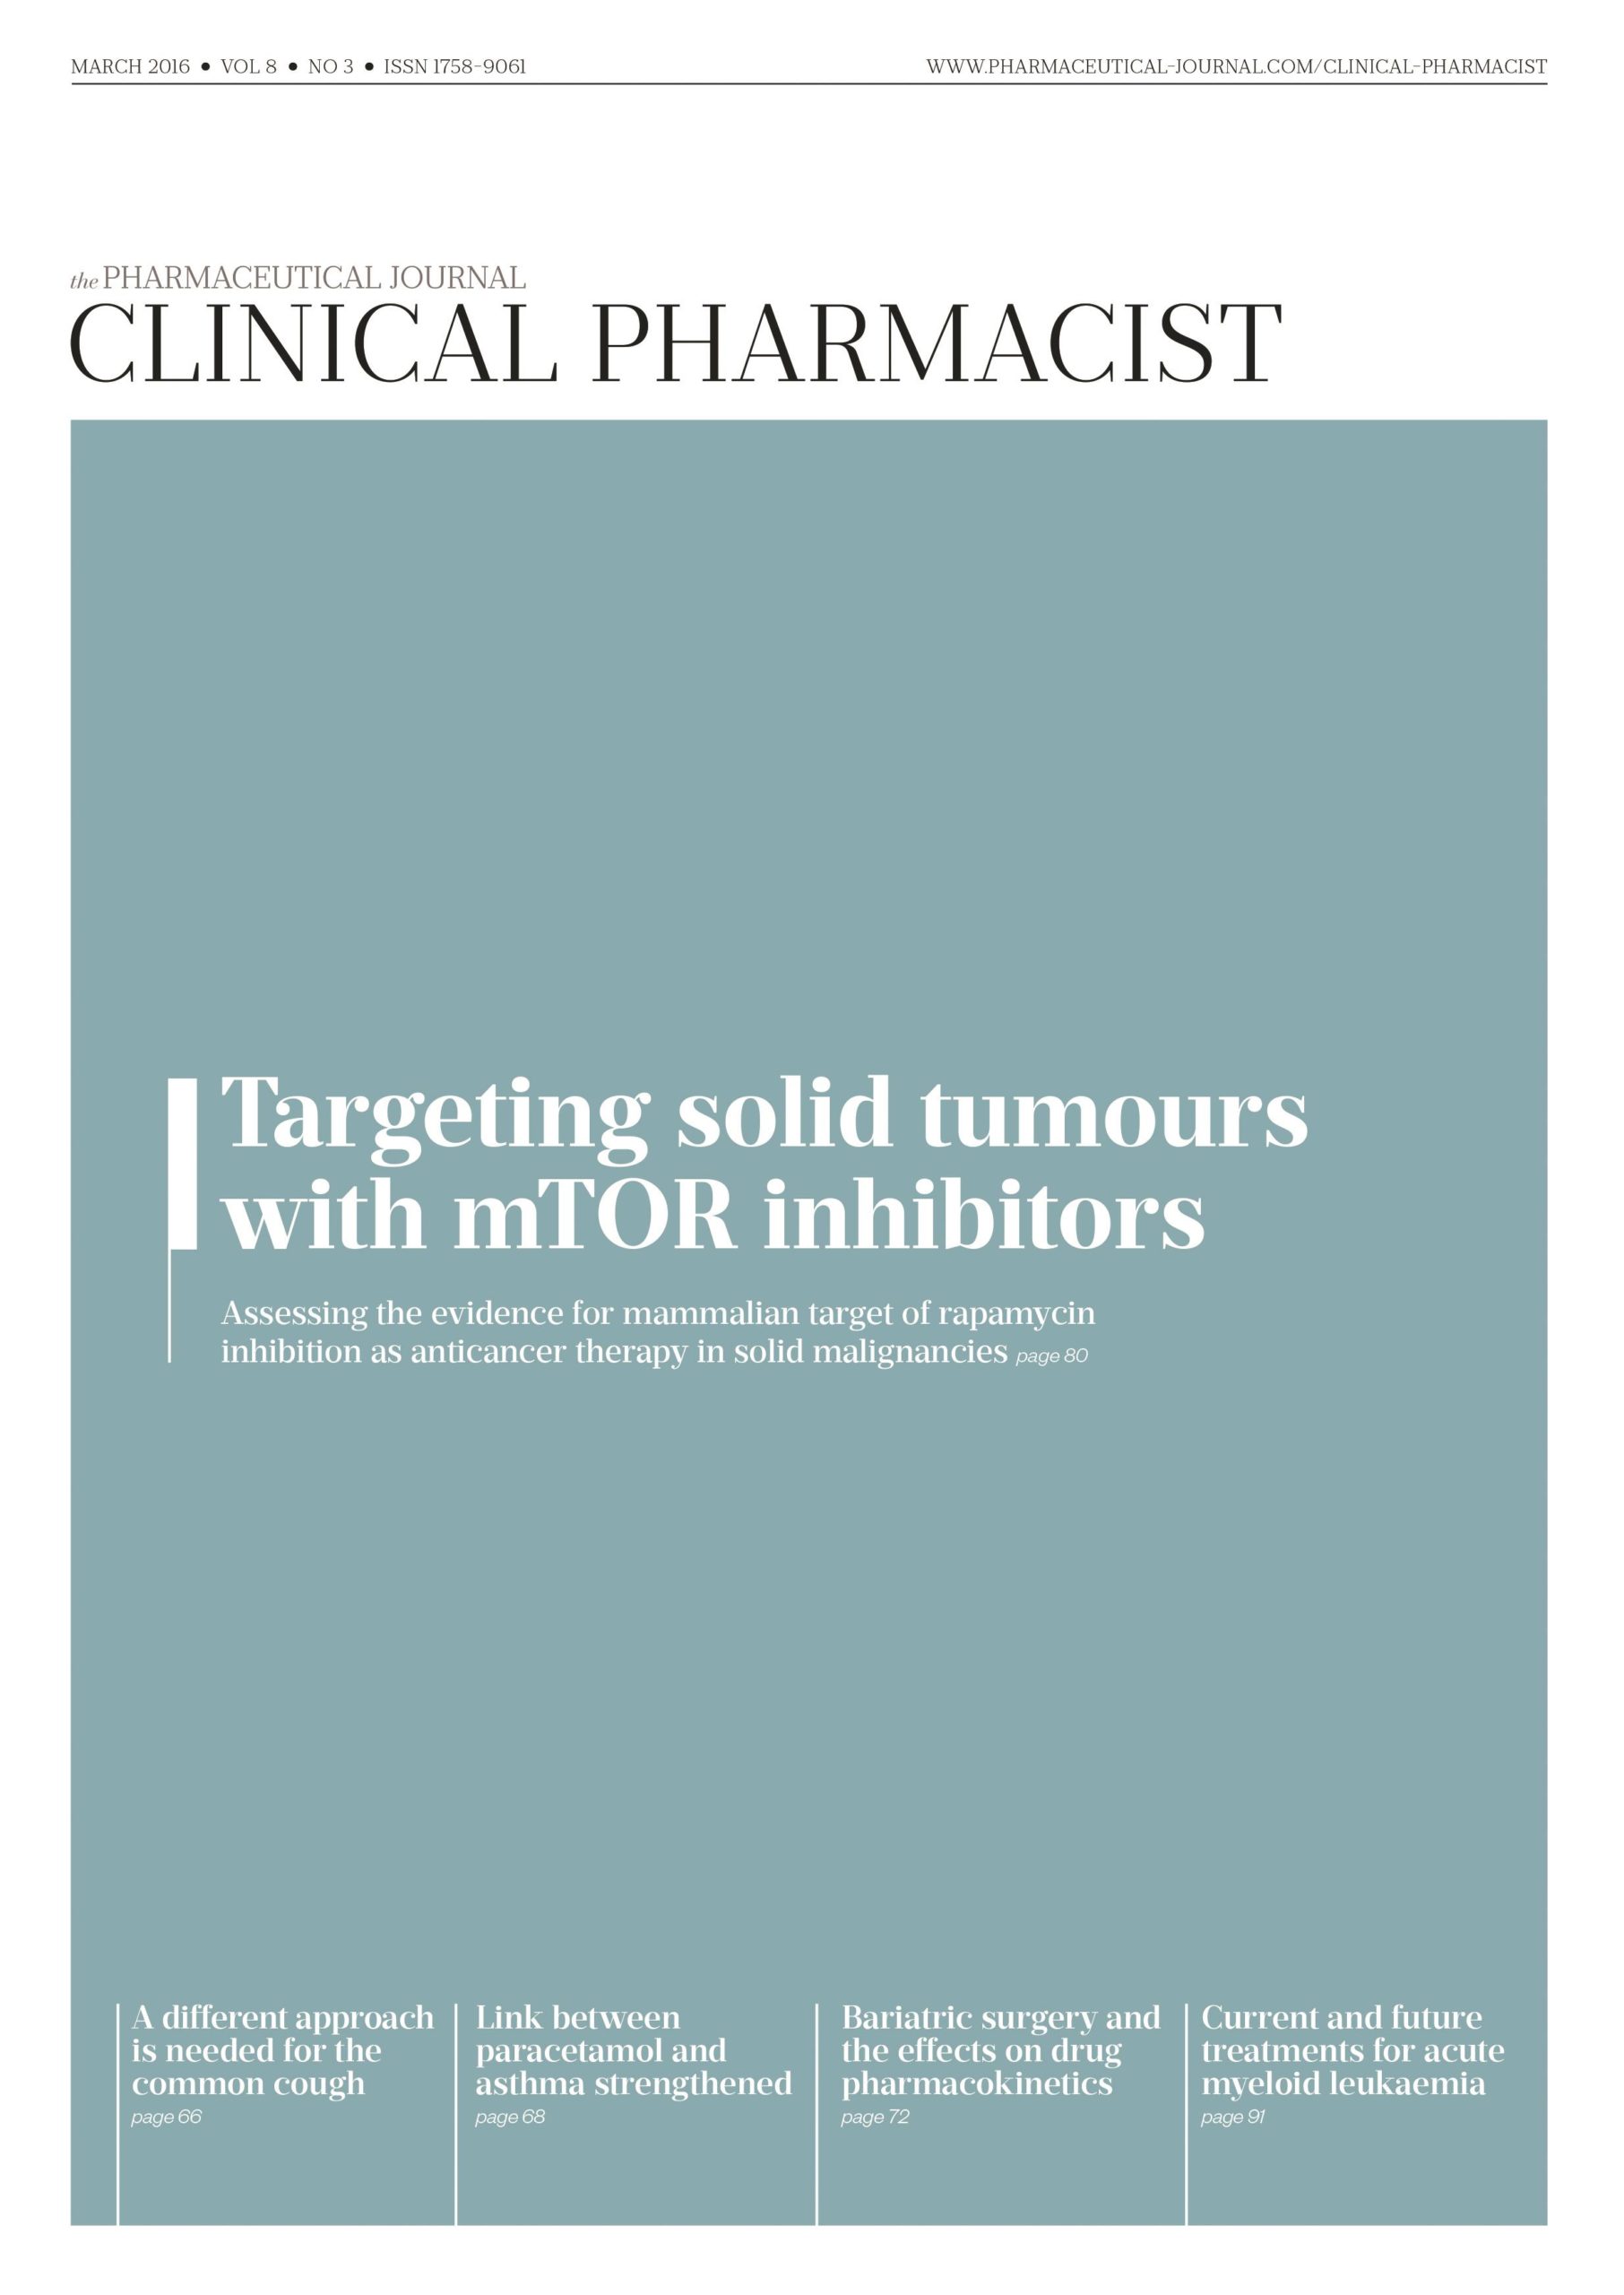 Publication issue cover for CP, March 2016, Vol 8, No 3